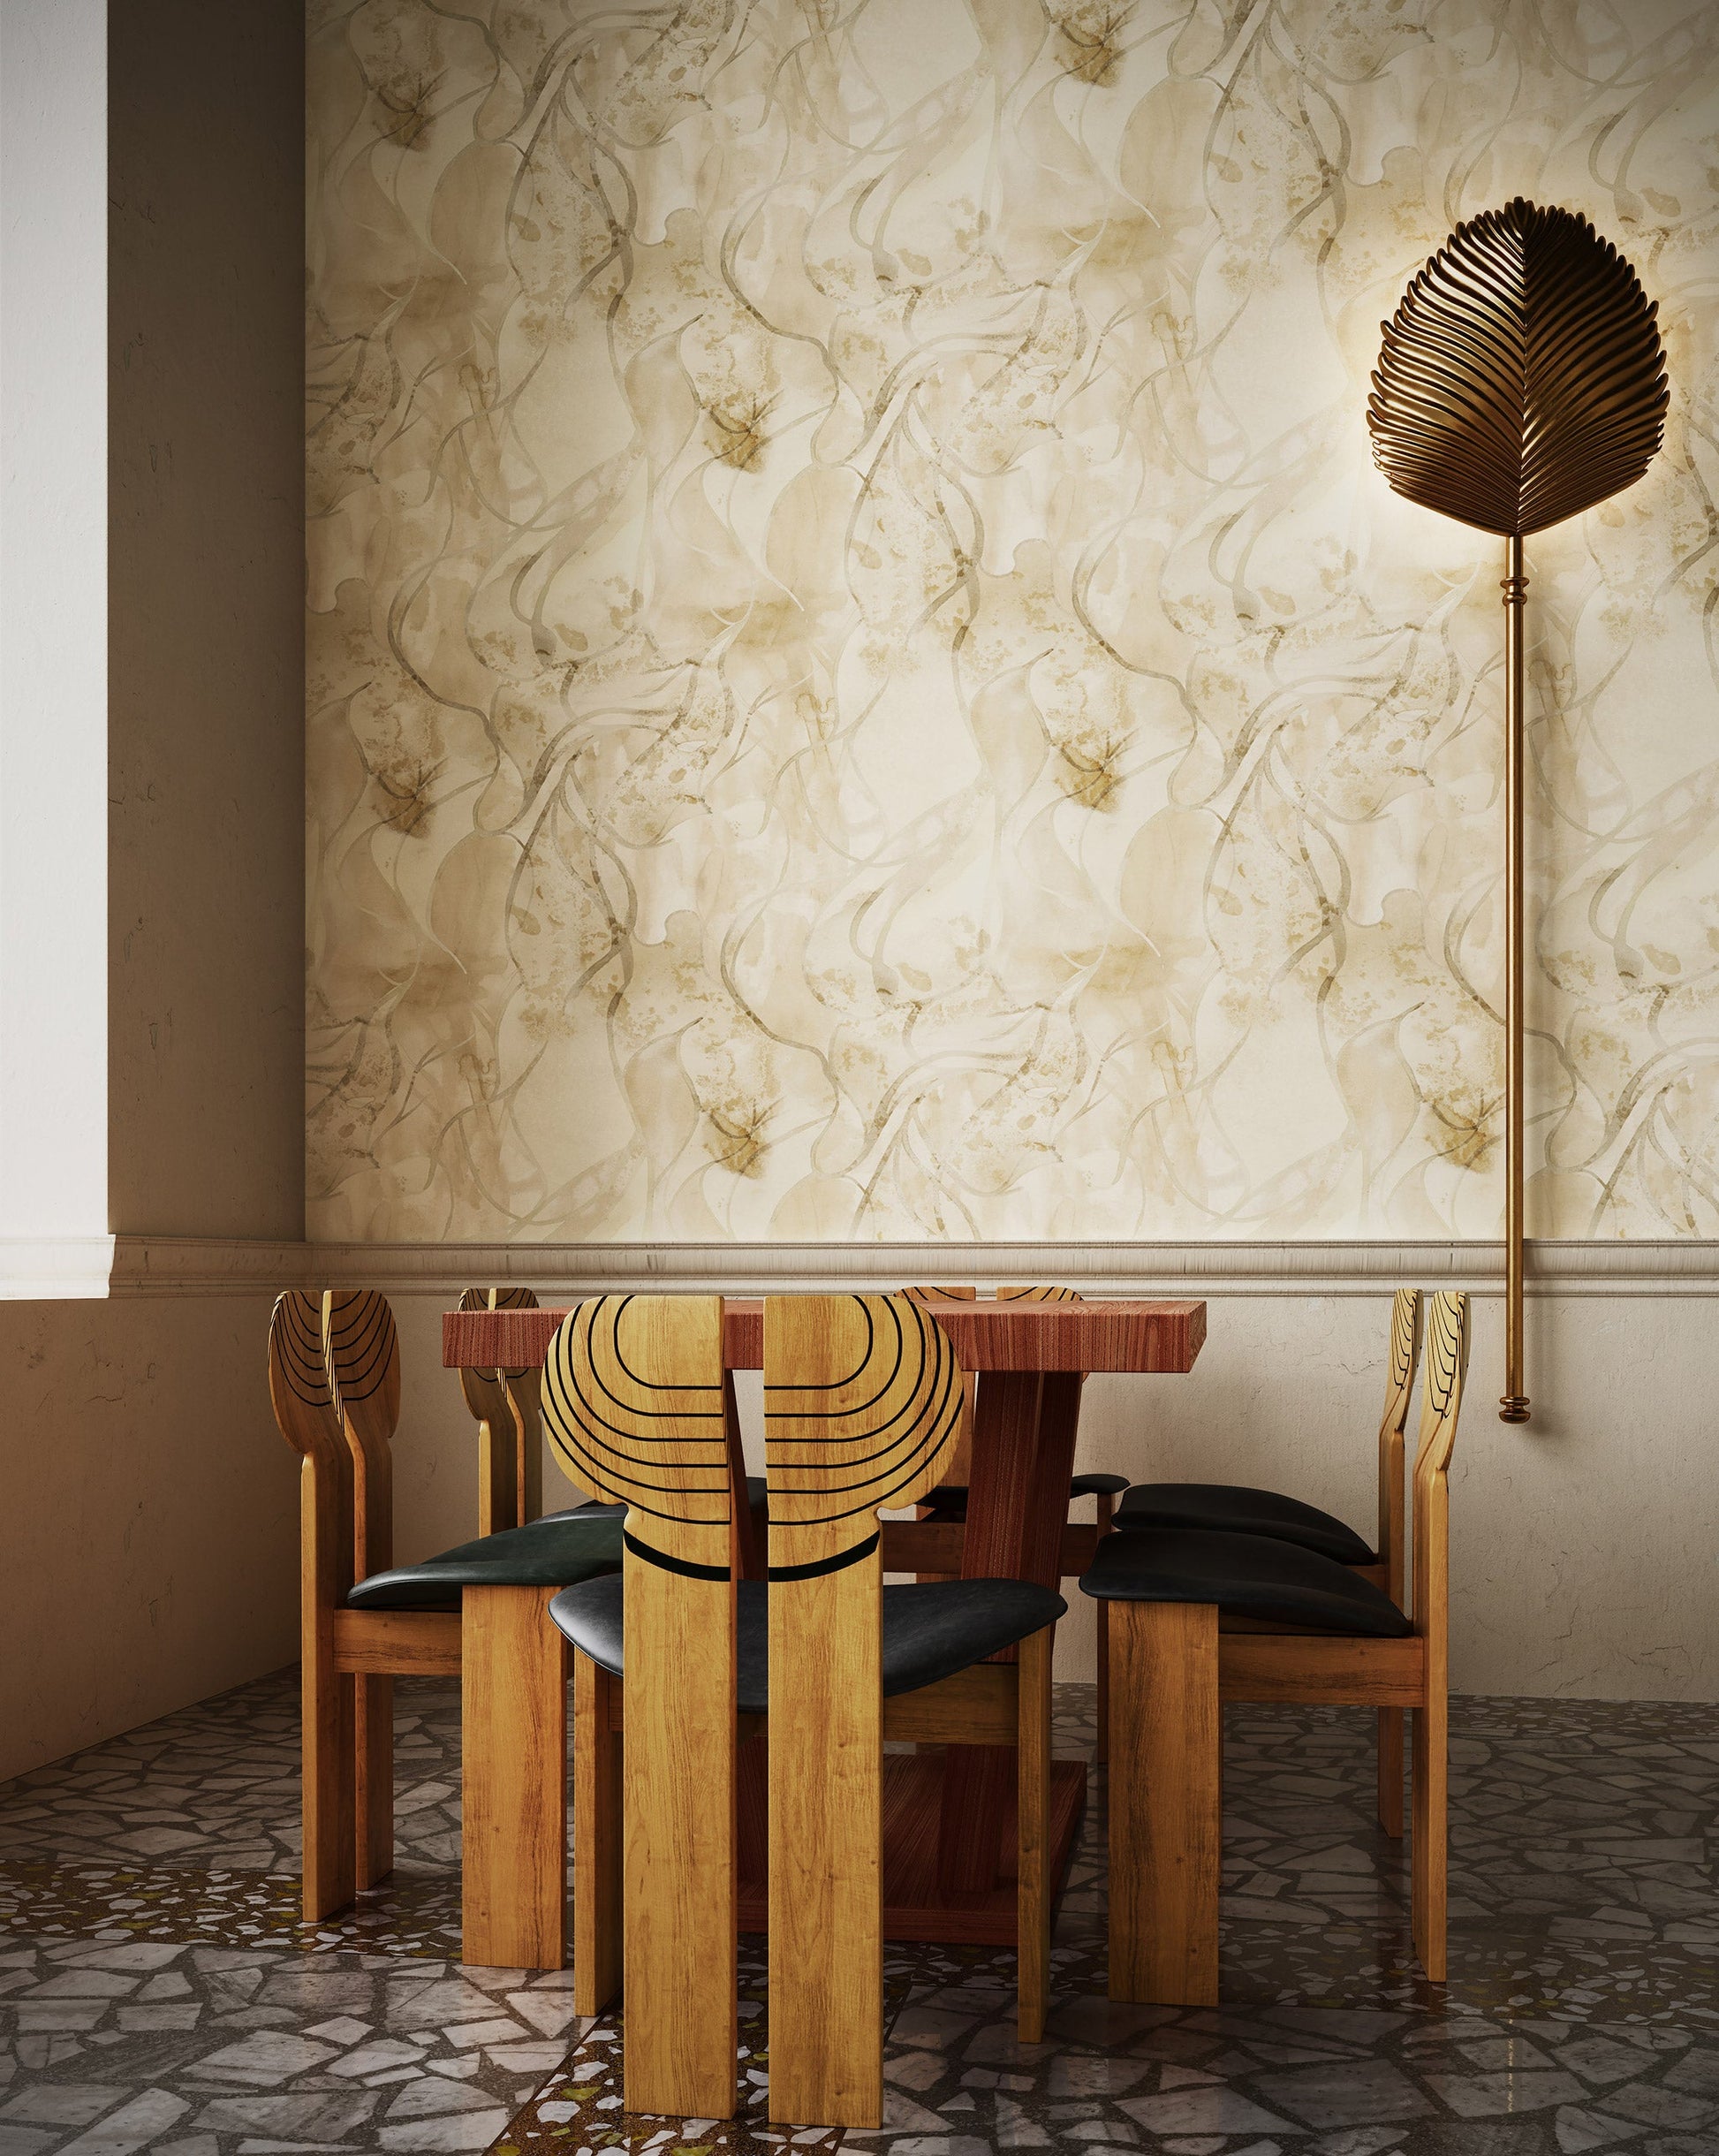 Eskayel's Hibiscus Lily Pearl wallpaper is a yellow hued pattern installed in a dining room.